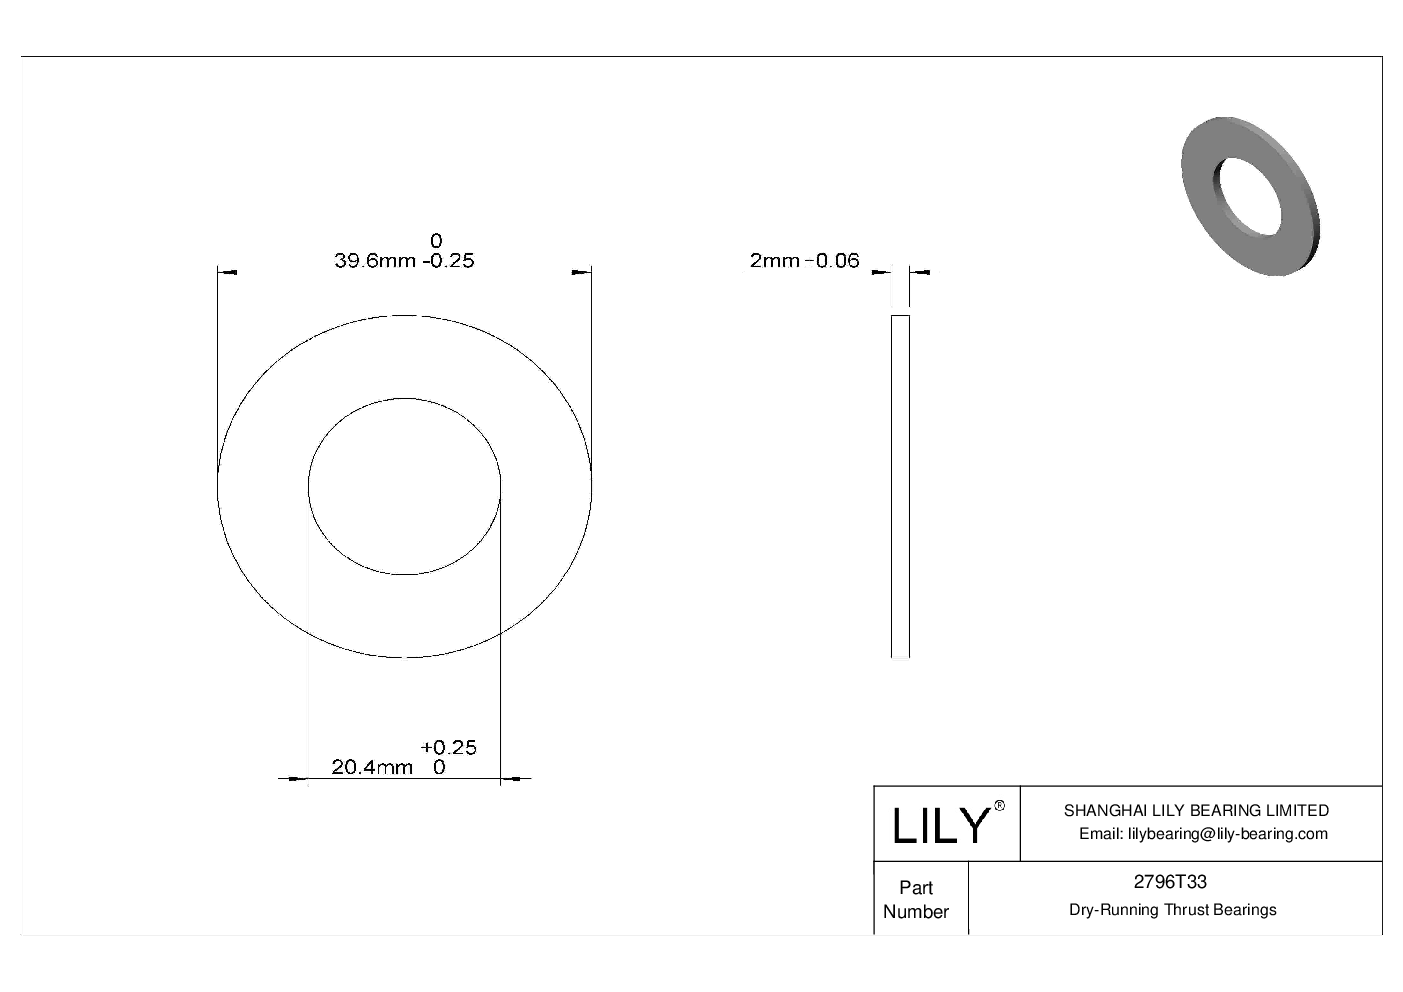 CHJGTDD Ultra-Low-Friction Dry-Running Thrust Bearings cad drawing